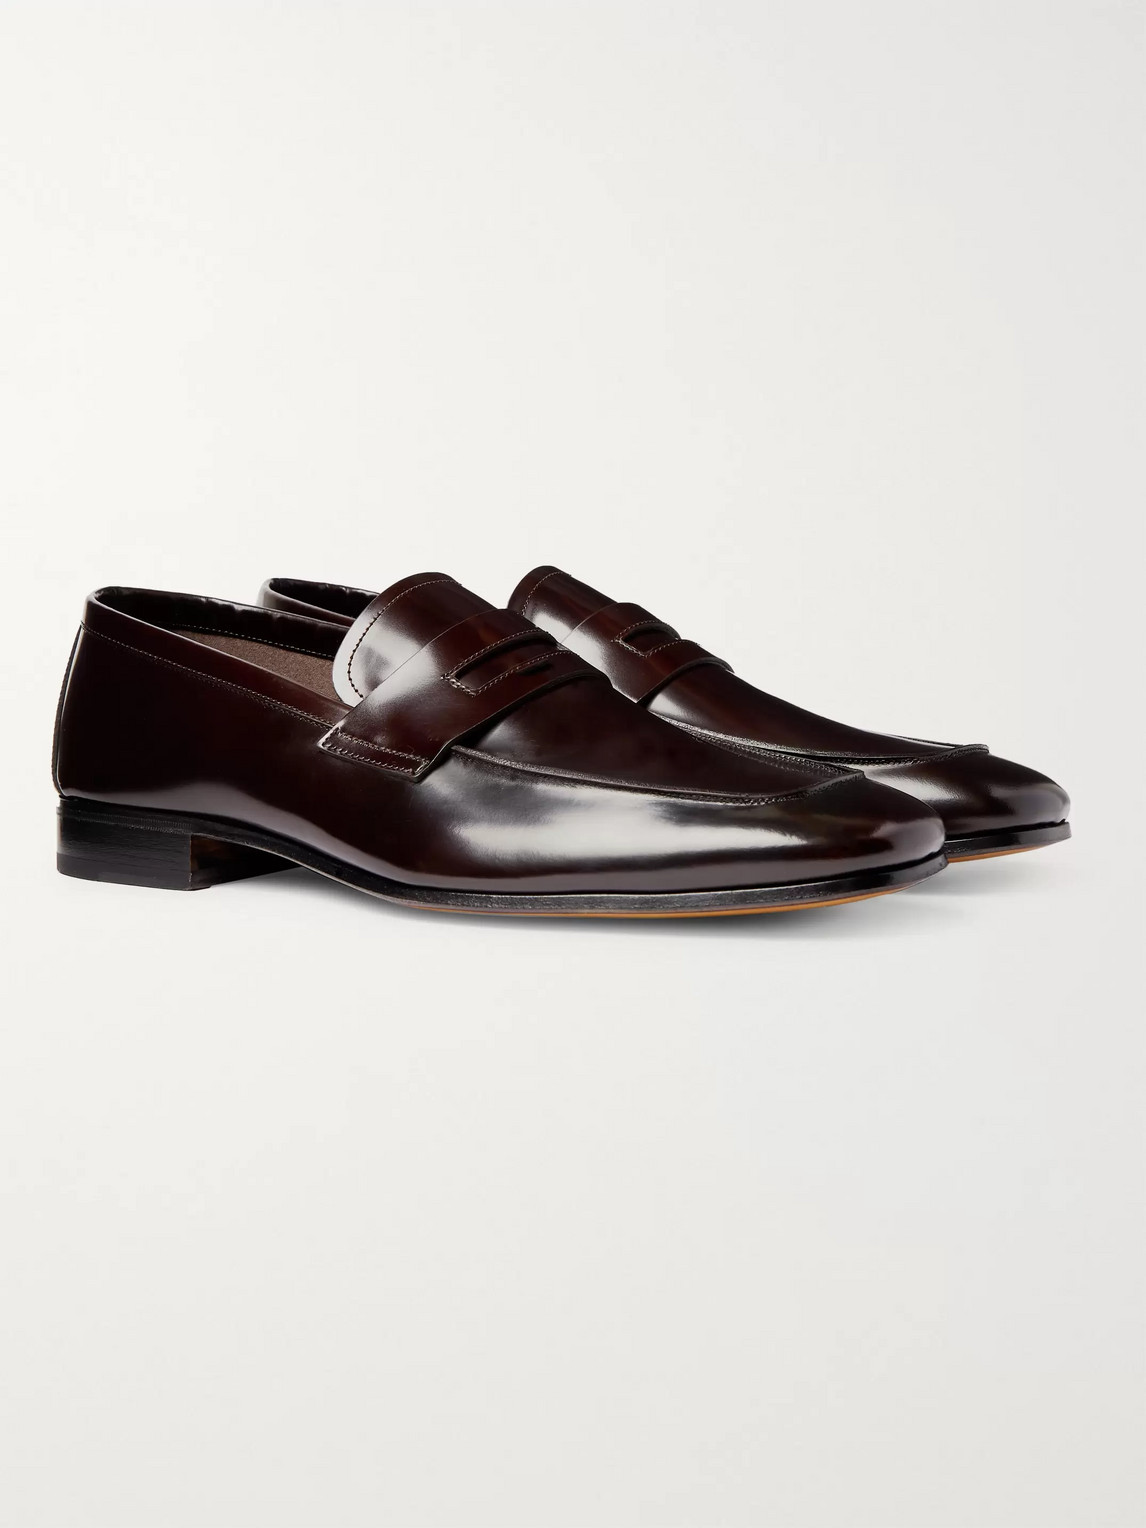 Tom Ford Midland Spazzolato Leather Penny Loafers In Burgundy